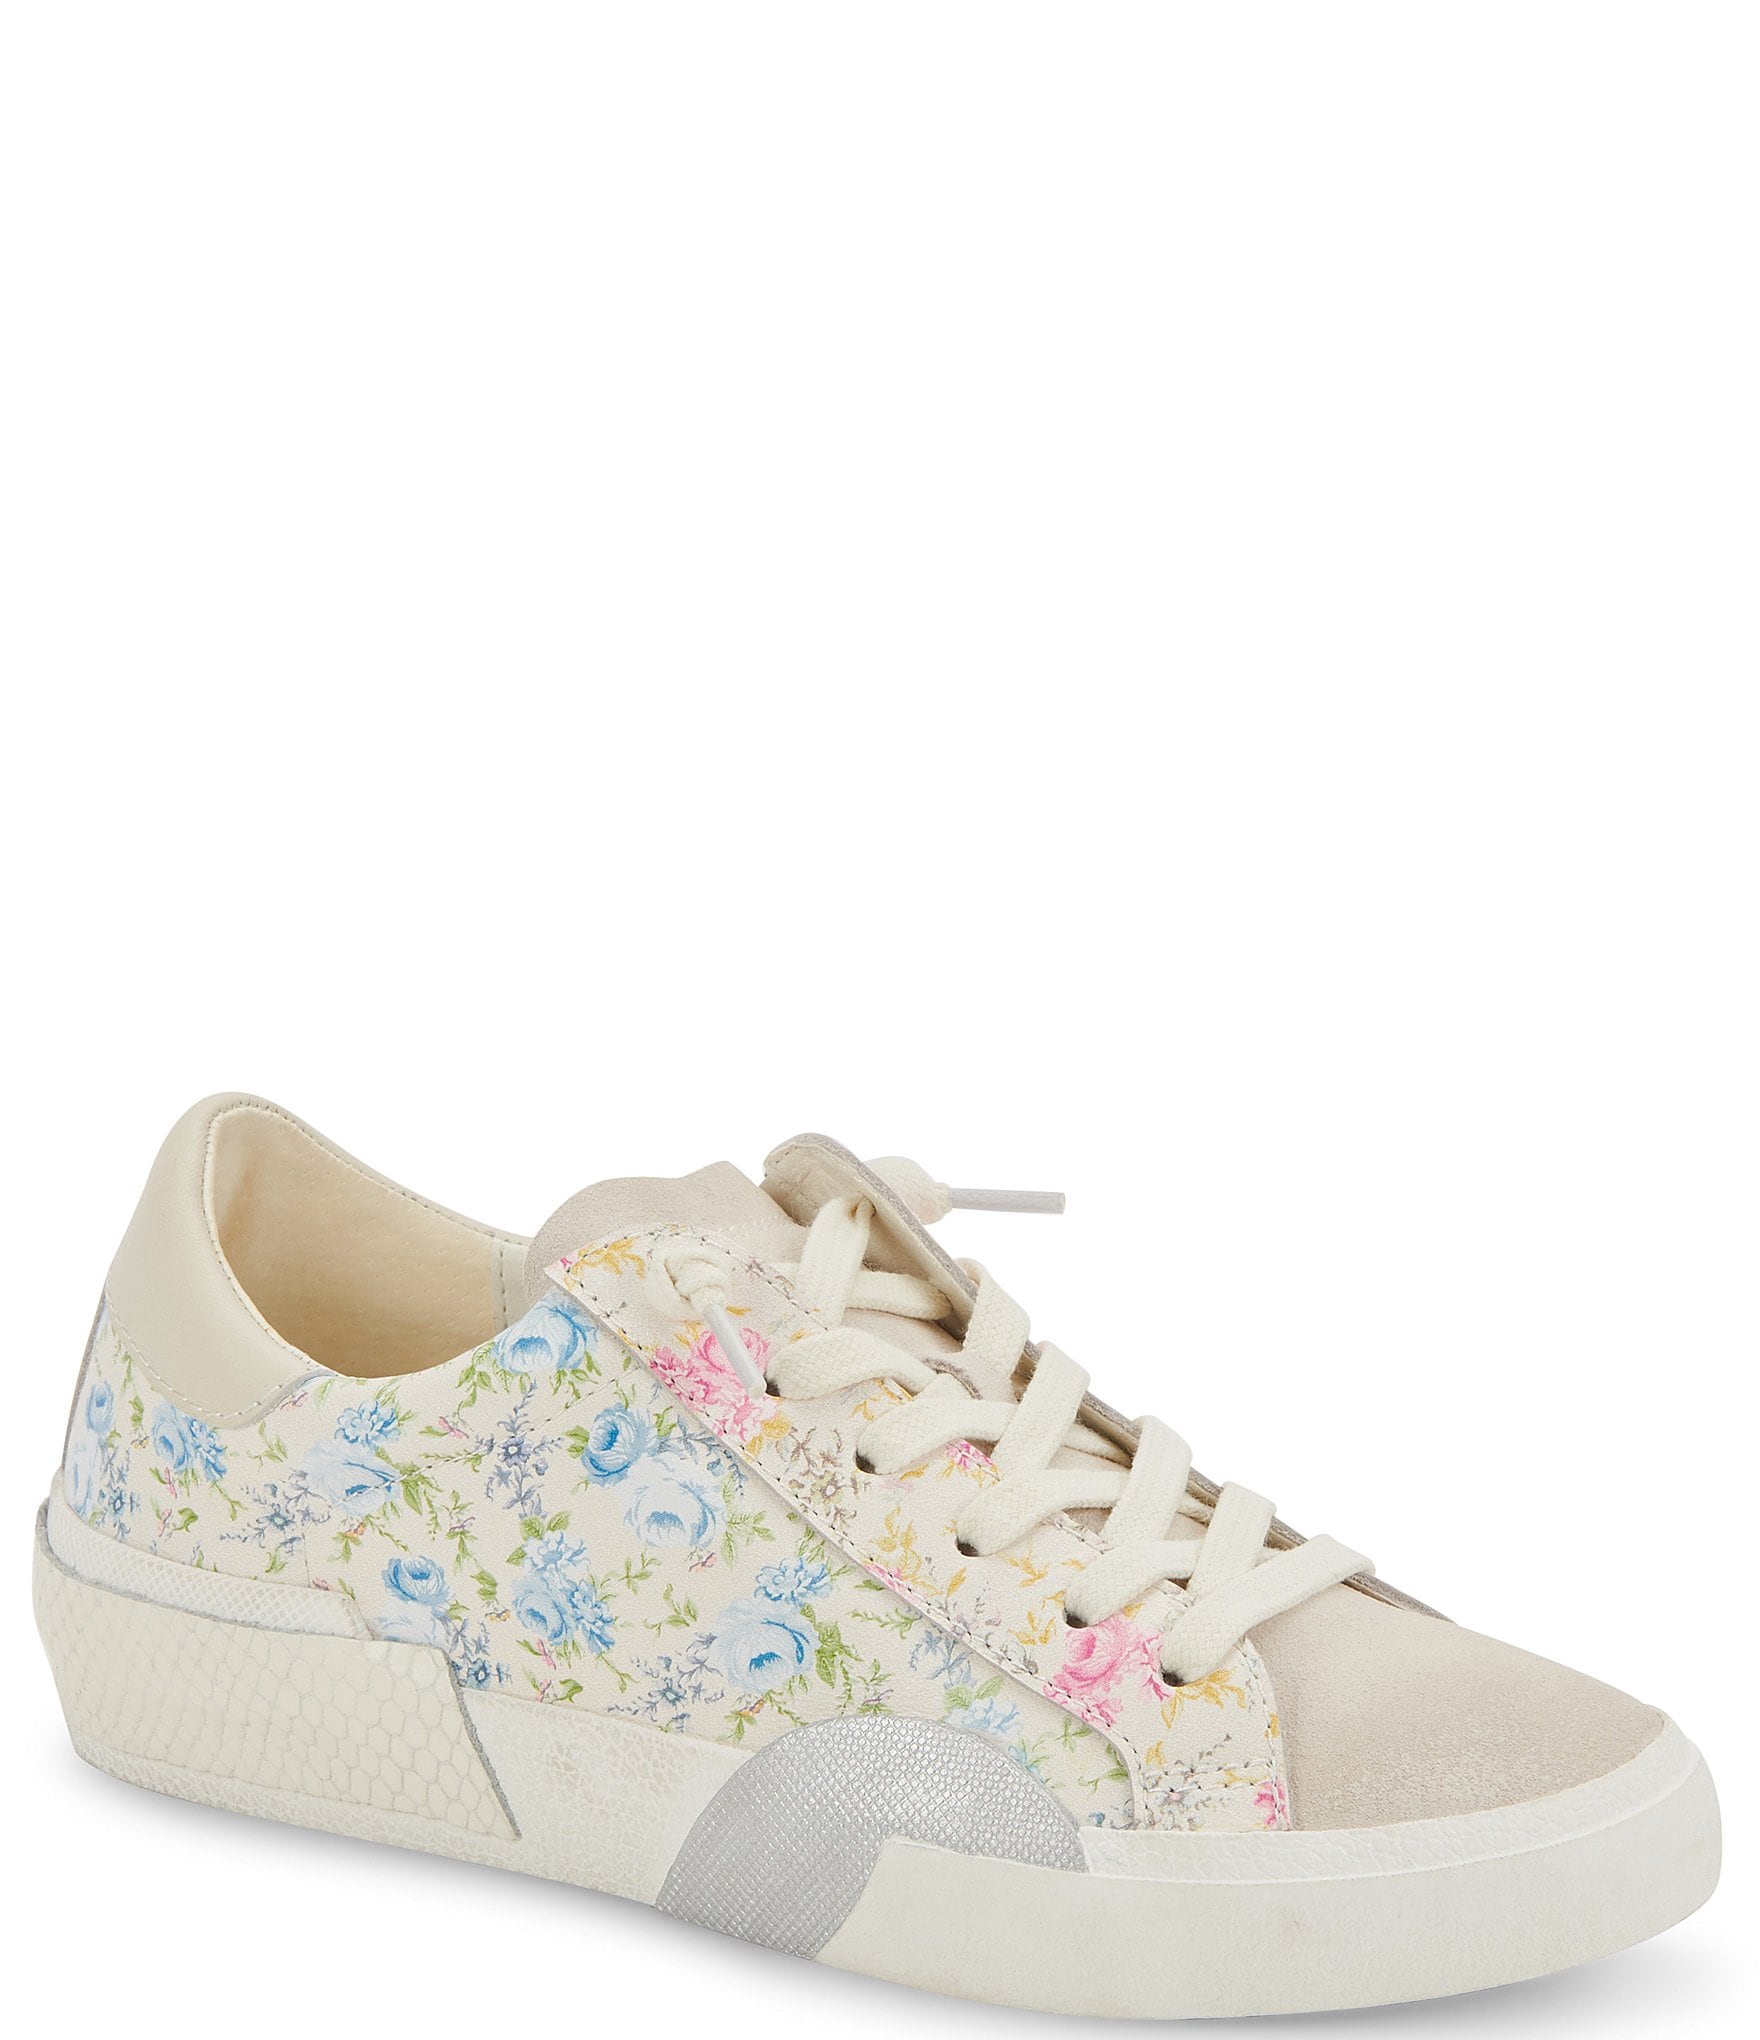 Dolce Vita Zina Leather Floral Detail Sneakers | Dillard's